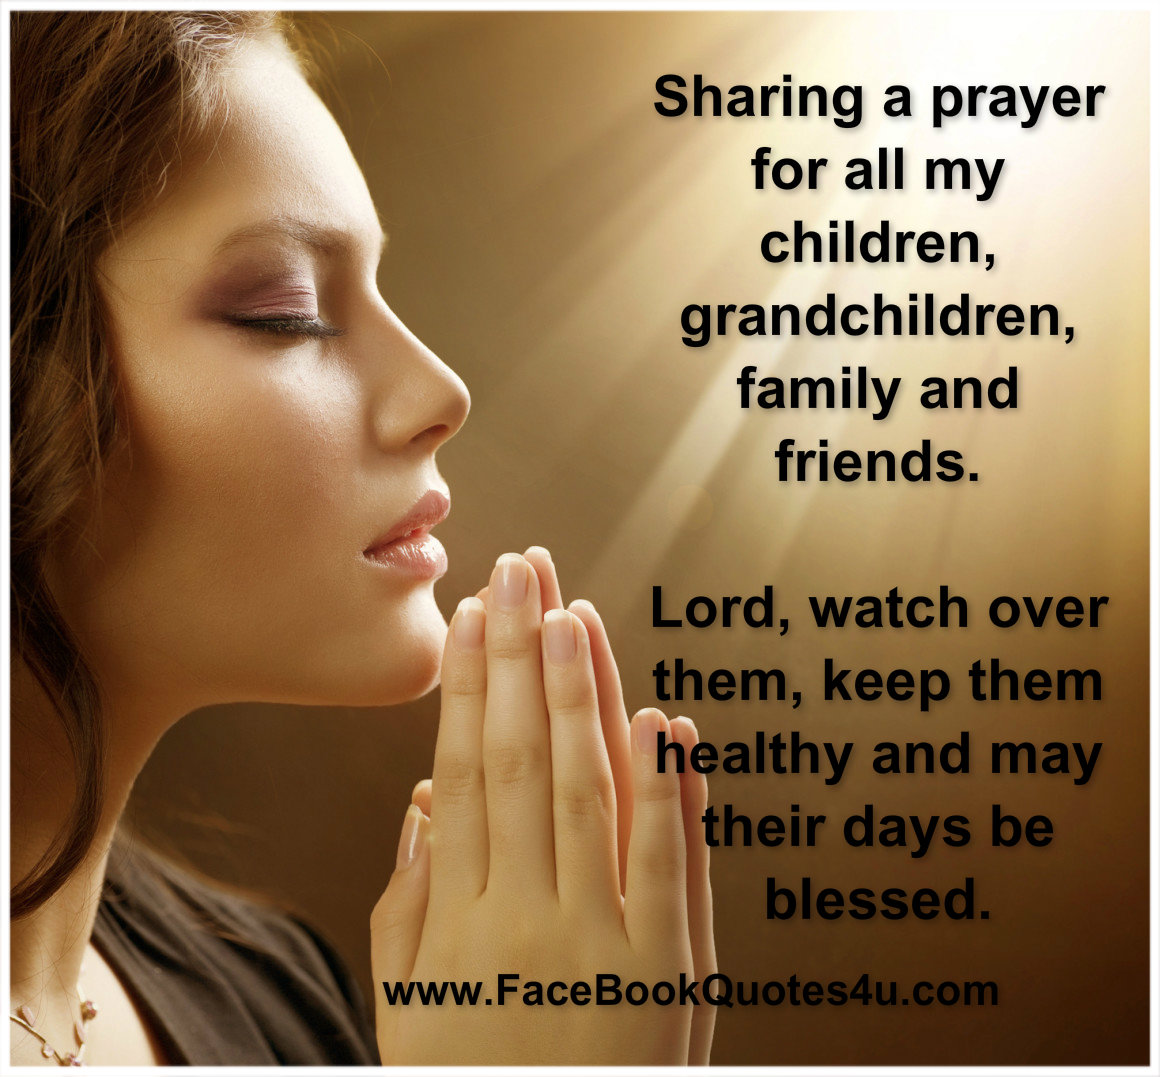  Prayer Quotes  For Friends And Family QuotesGram